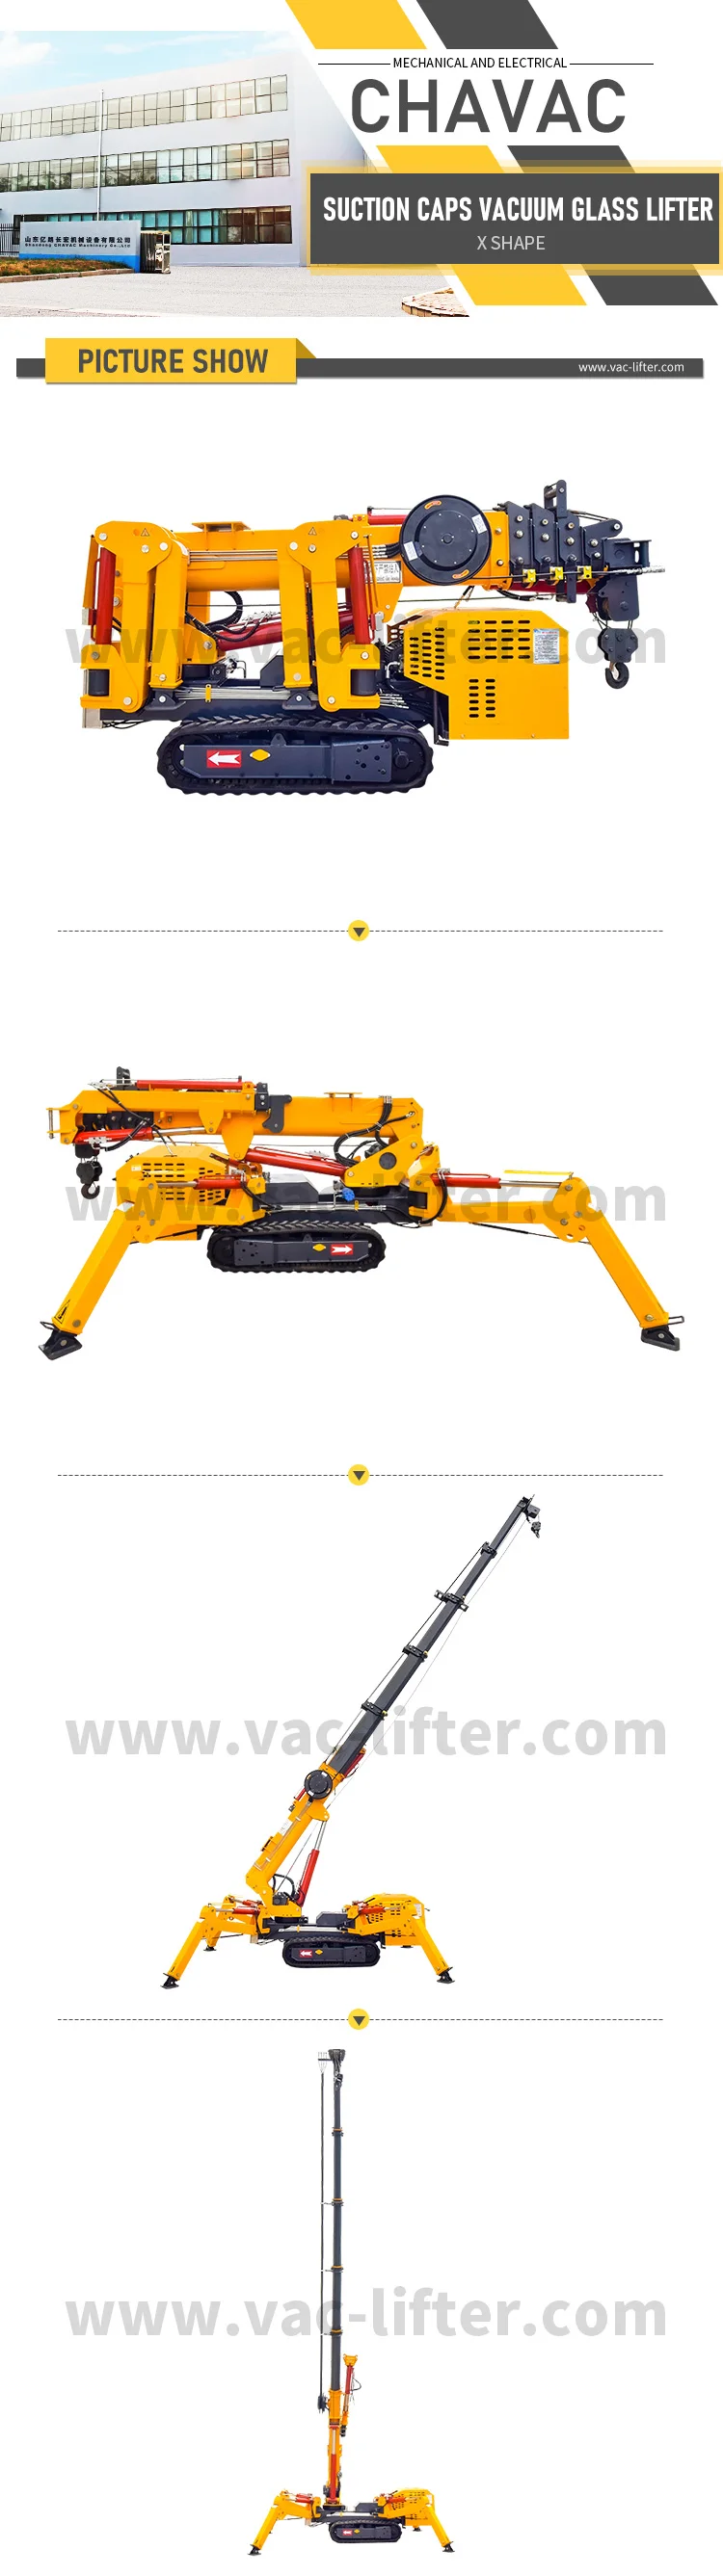 China spider crane fly jib Mini Electric Diesel 1.2 ton to 18 ton Lifting Equipment with Off Road Crawler Tracks